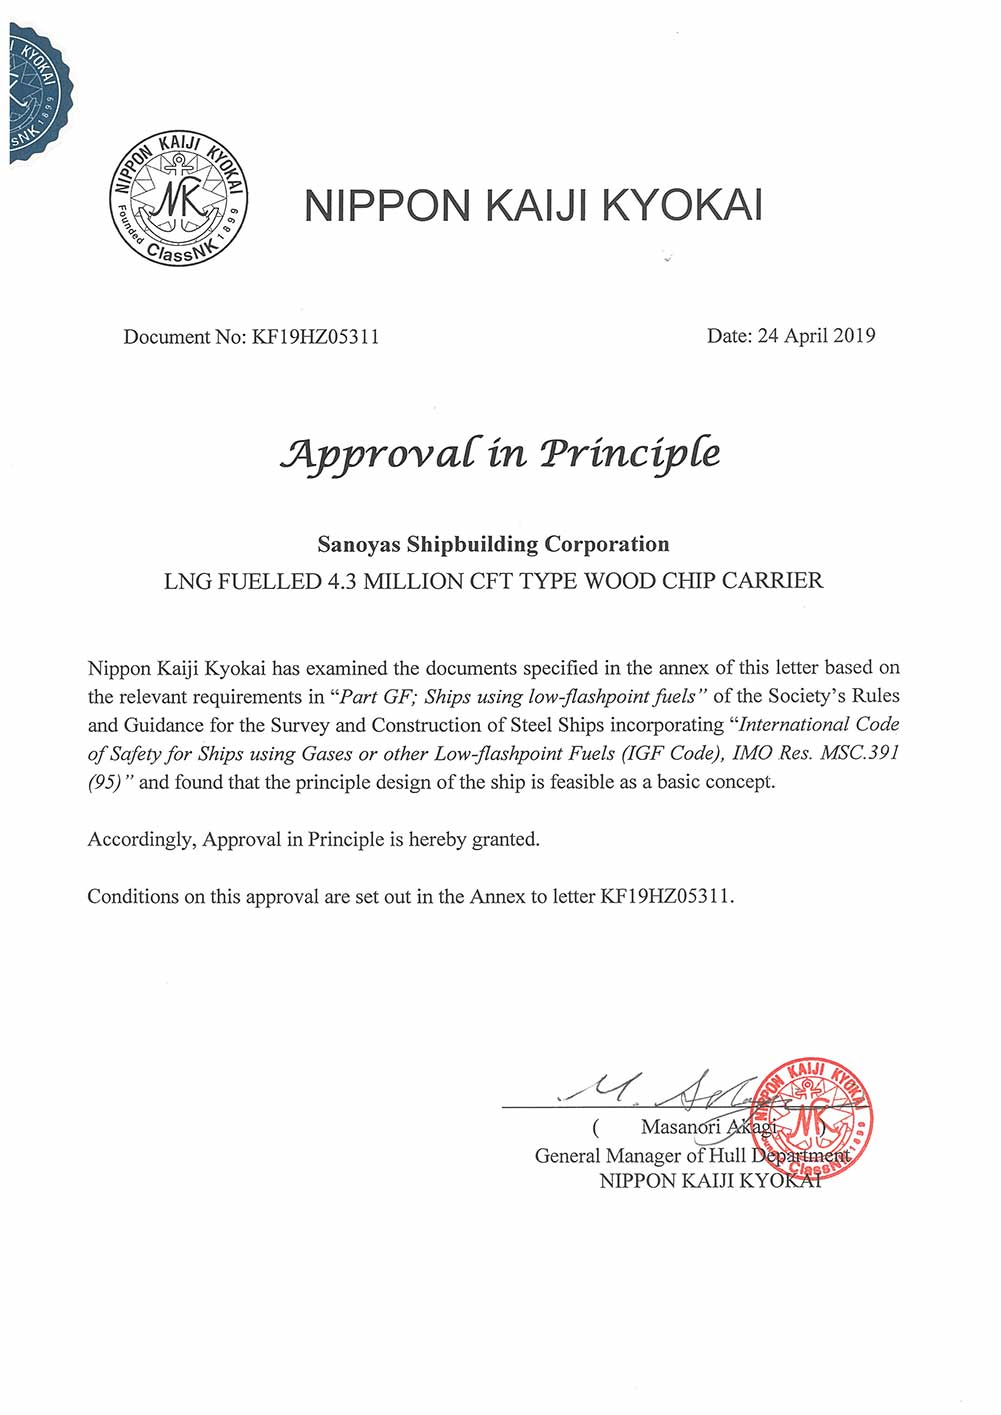 We have obtained Approval in Principle（AiP）from ClassNK for the design of a LNG fueled new Wood Chip Carrier